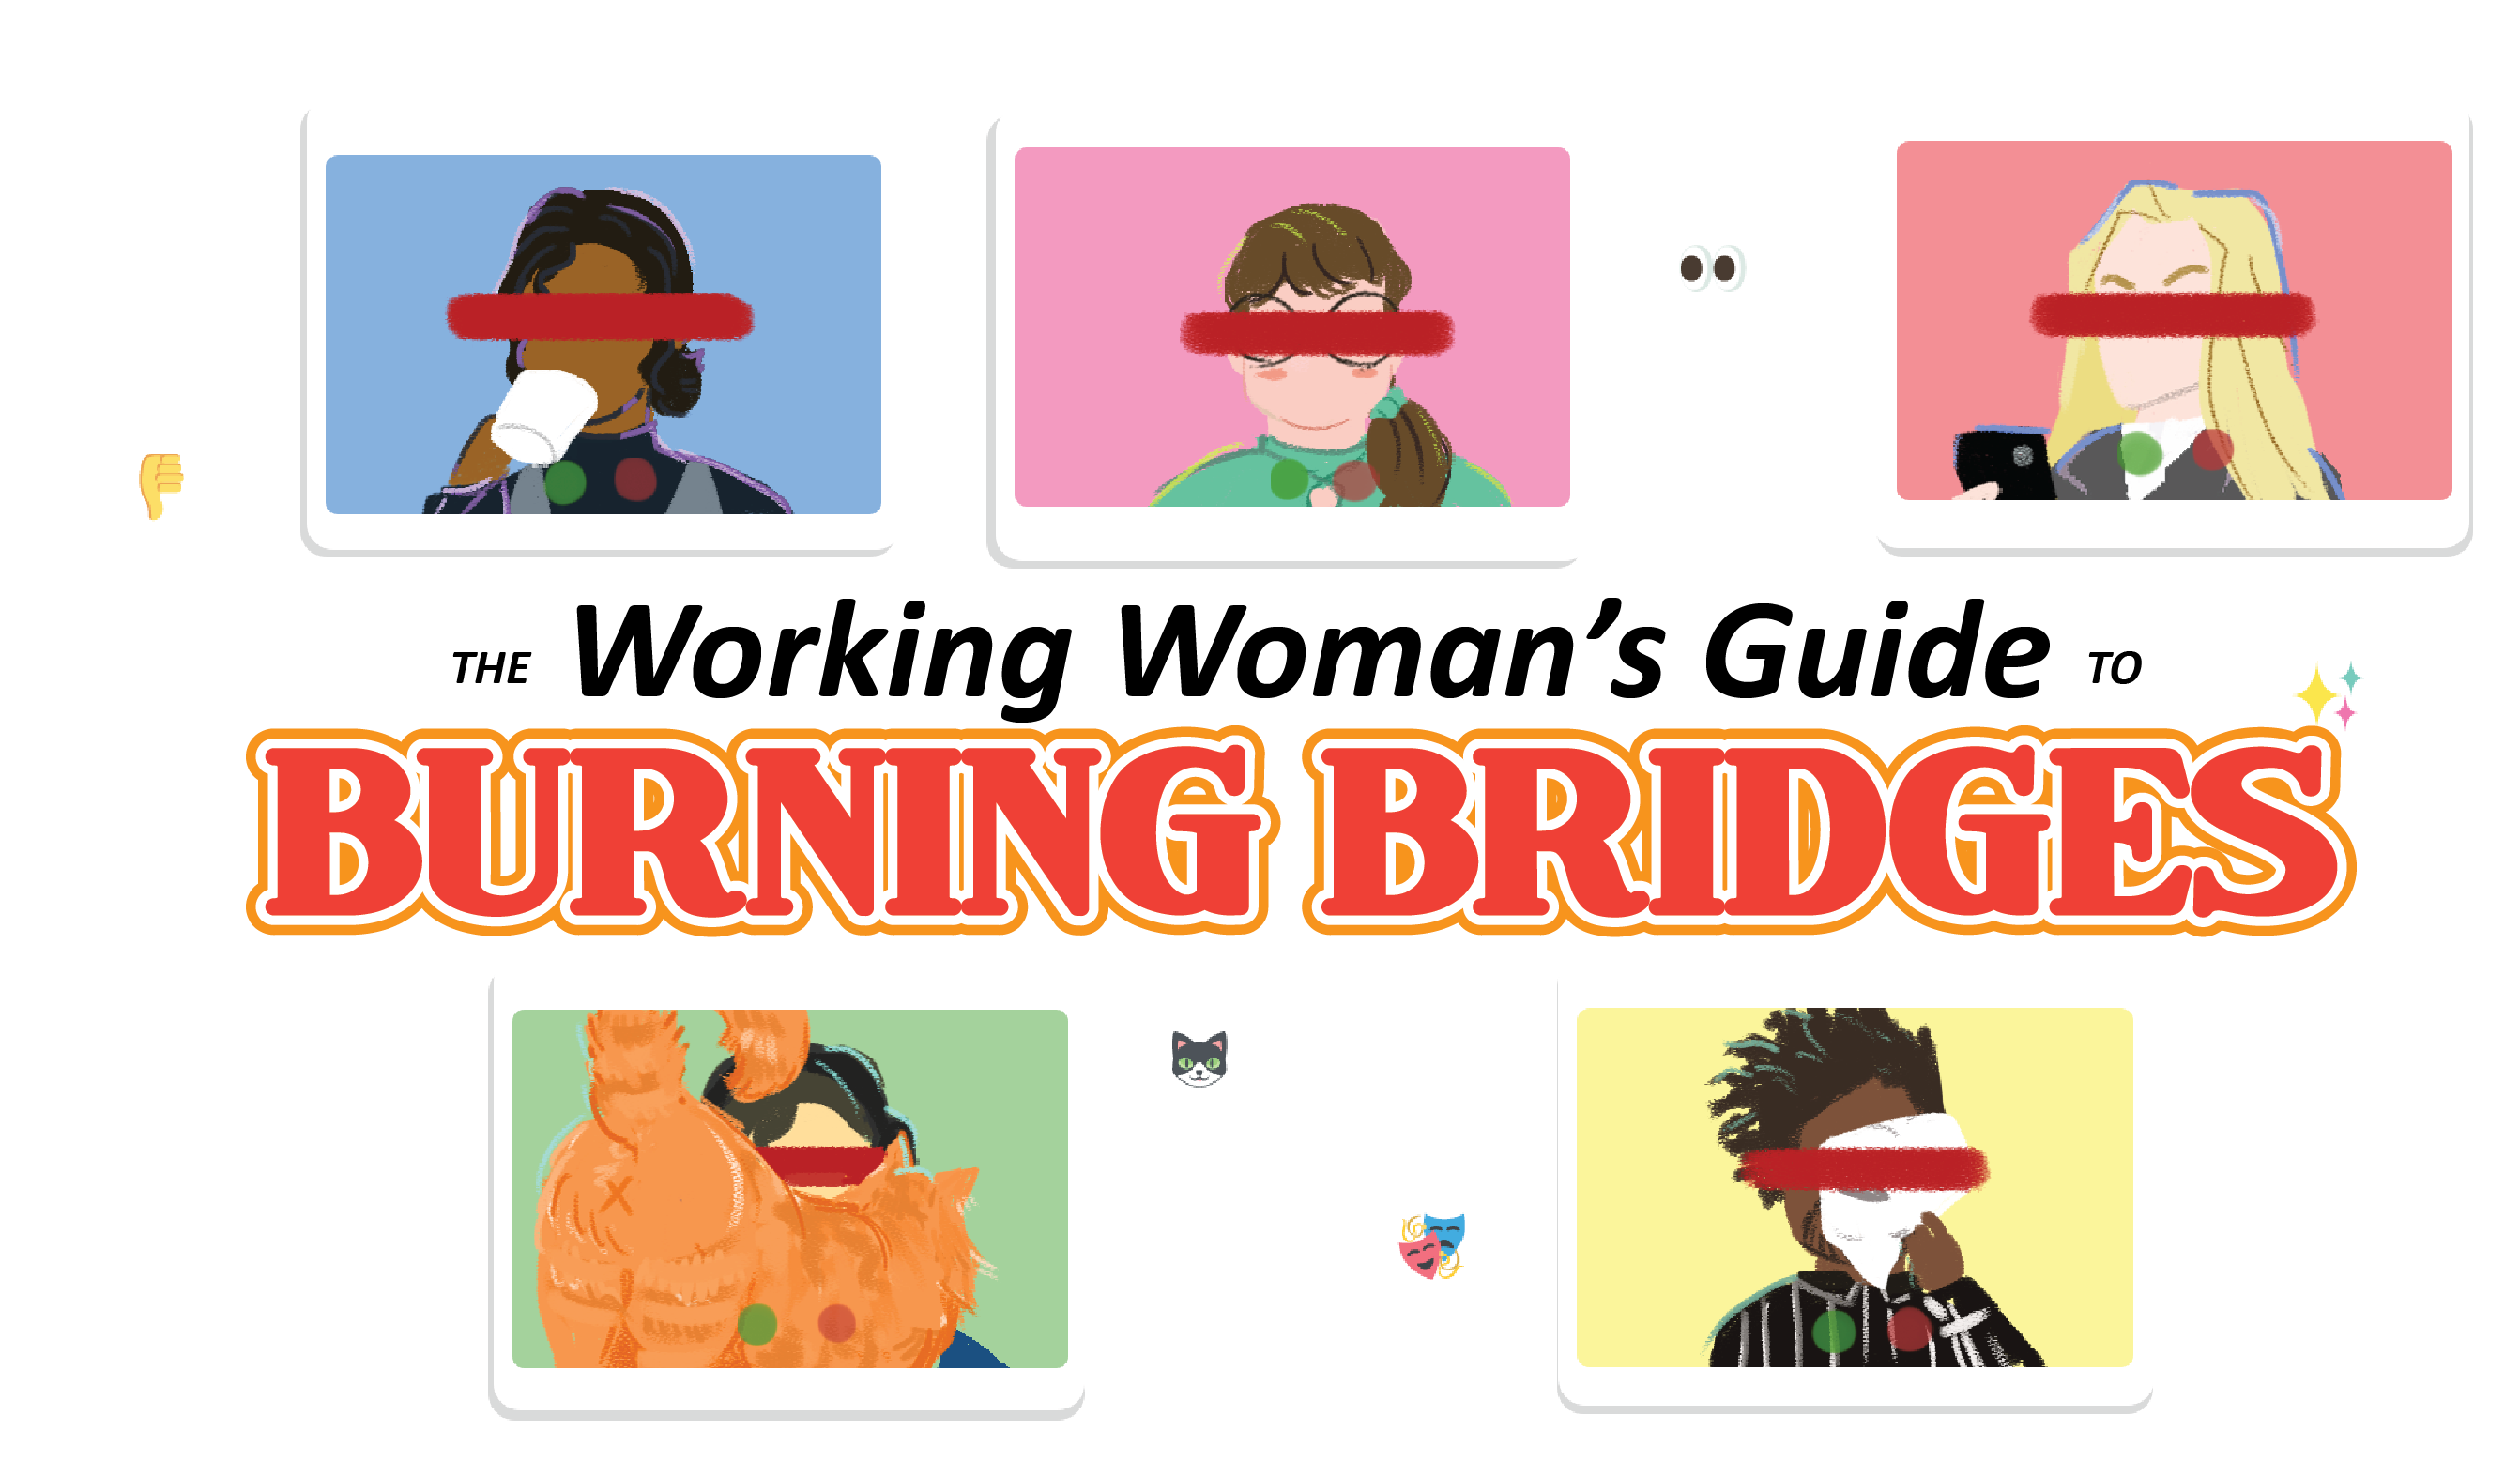 The Working Woman's Guide to Burning Bridges - DEMO